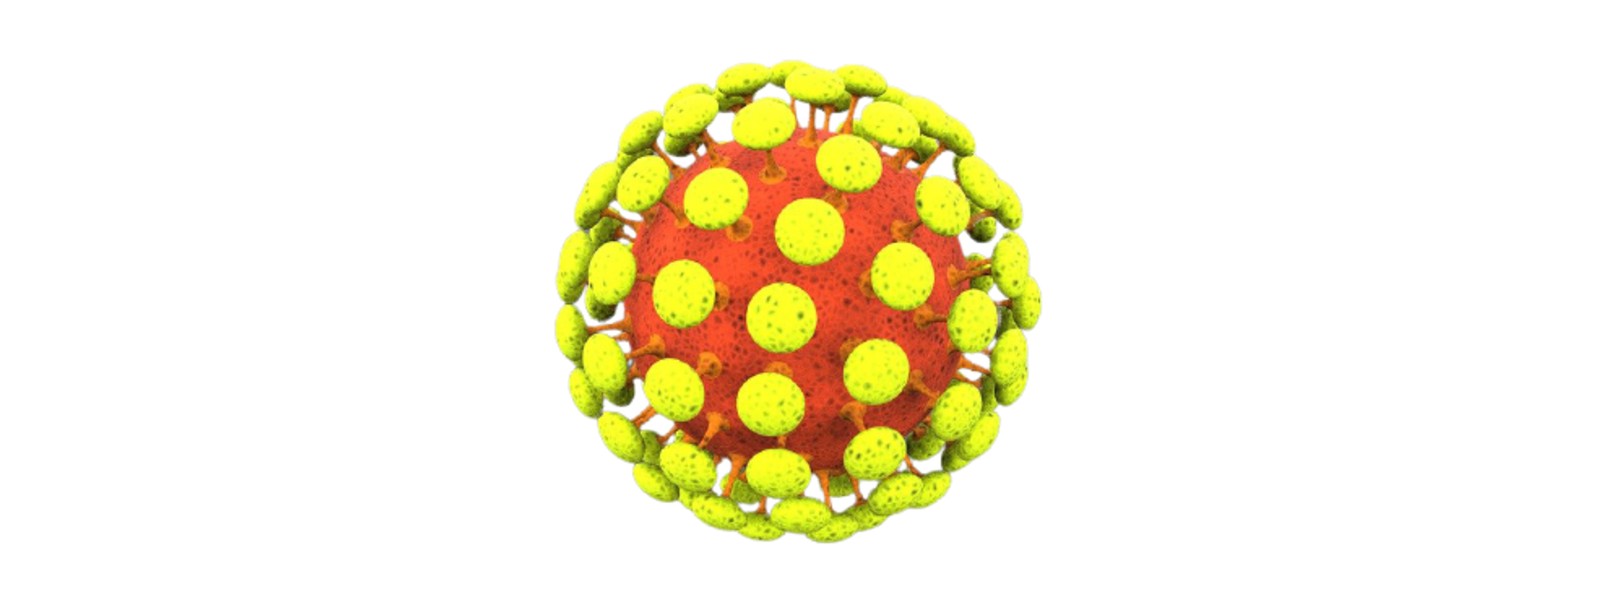 Nanjing: New virus outbreak worst after Wuhan